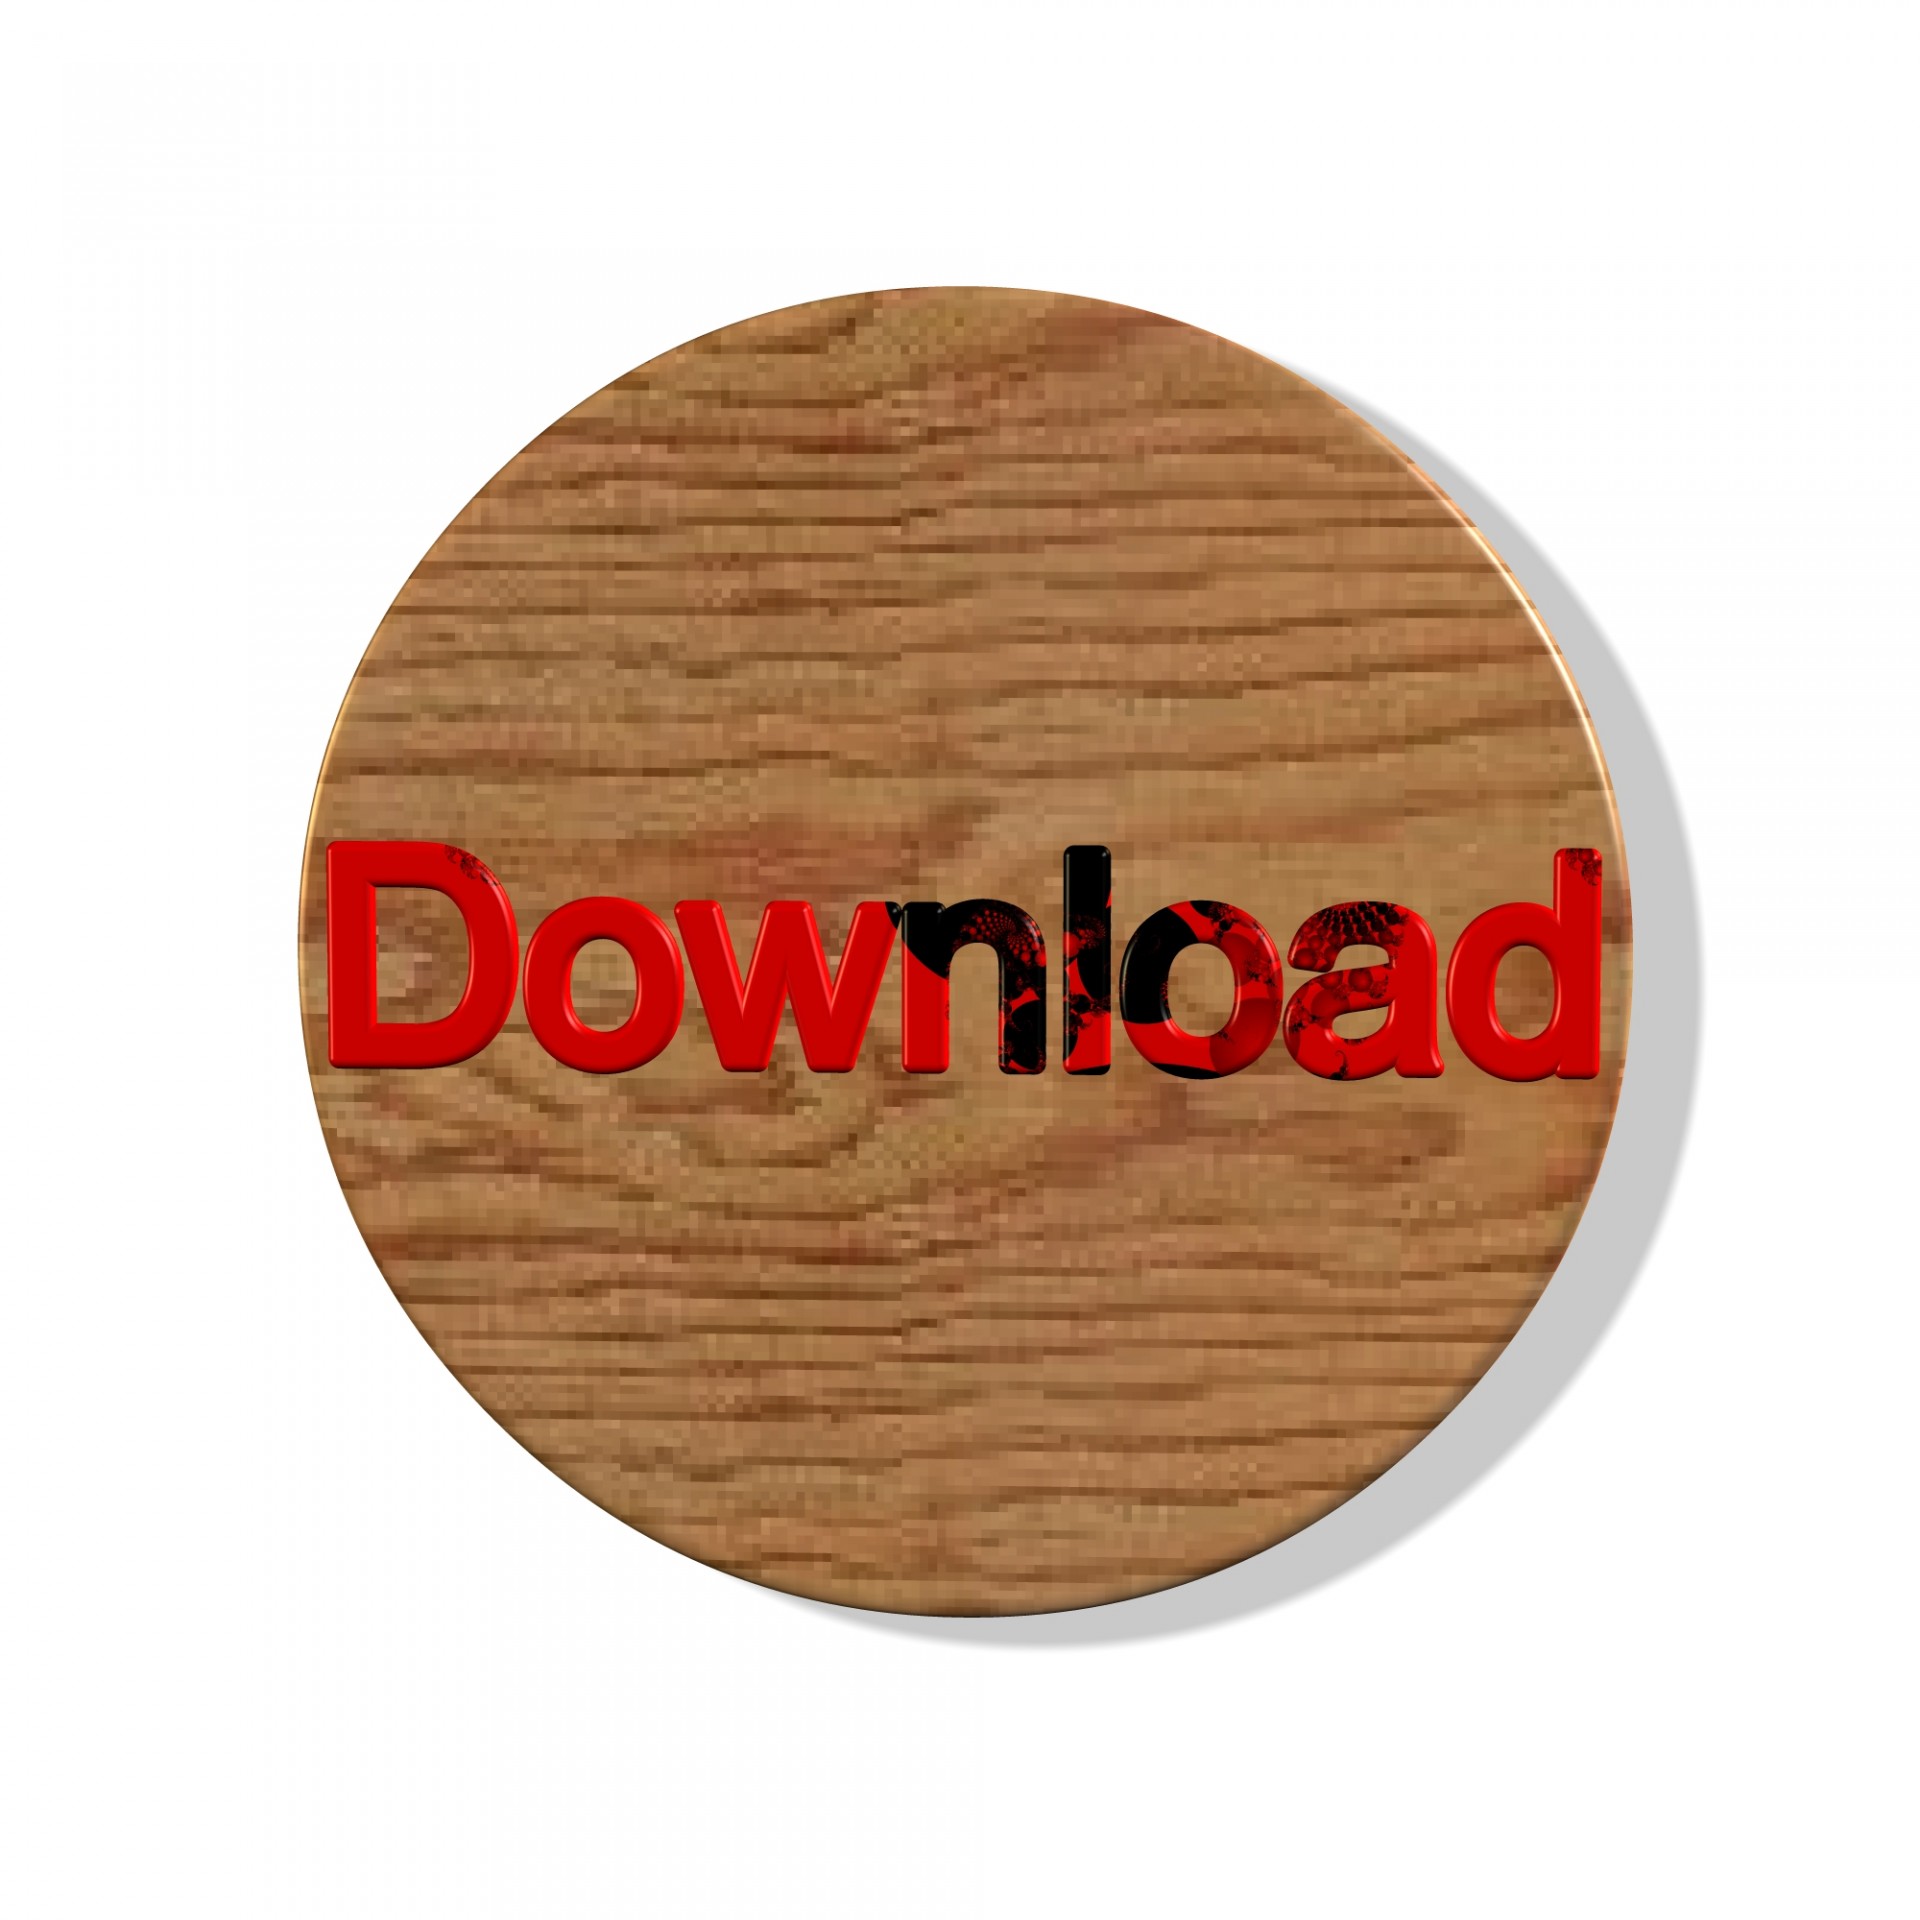 download button website free photo